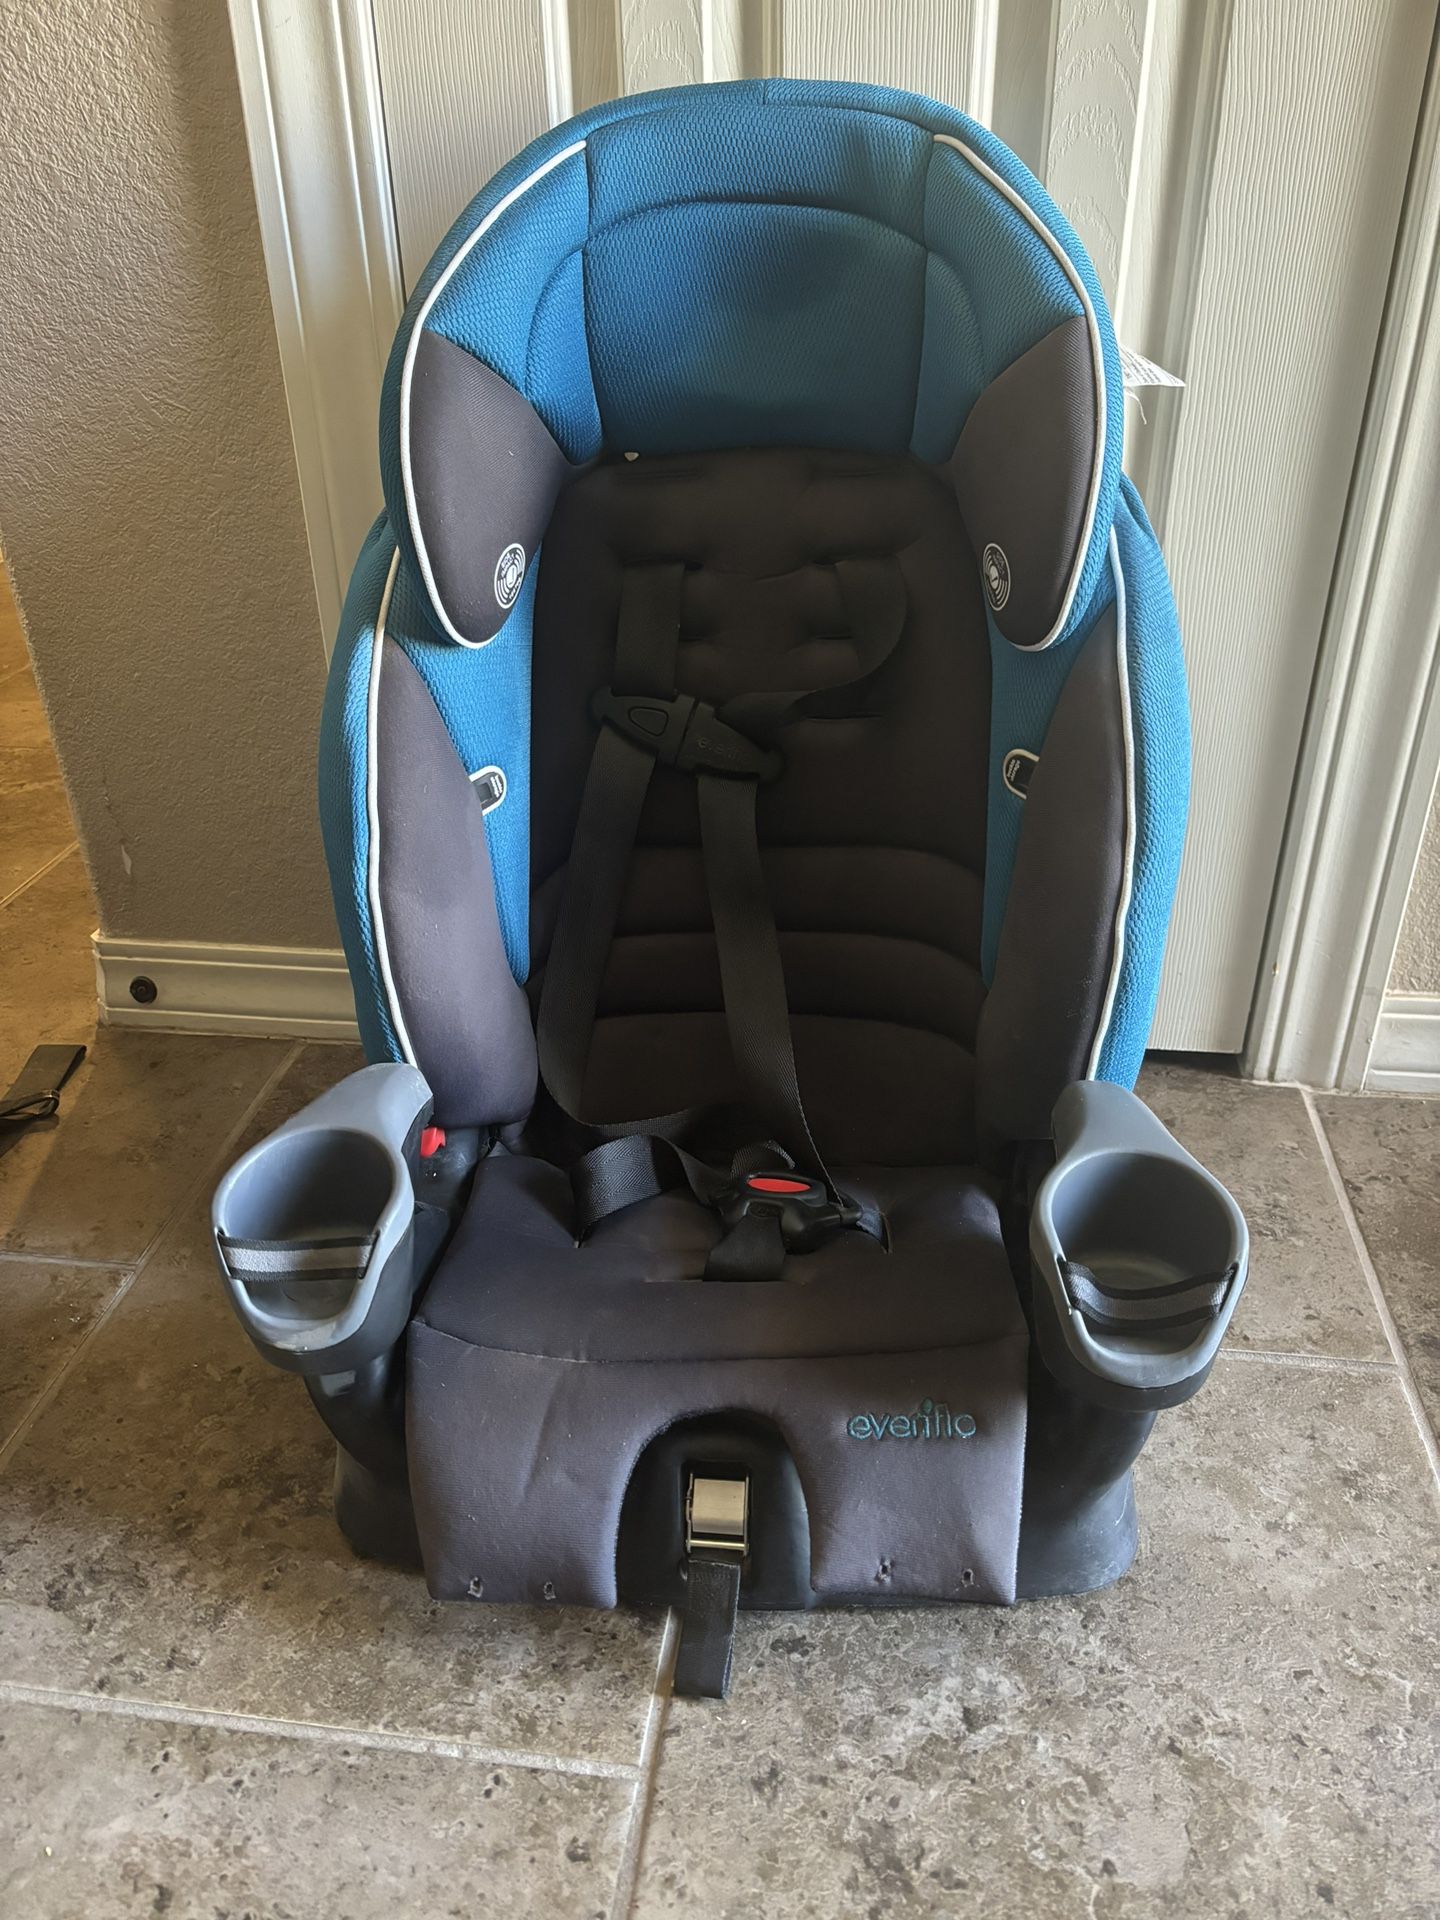 Evenflo  2 In 1 Car Seat  /booster 